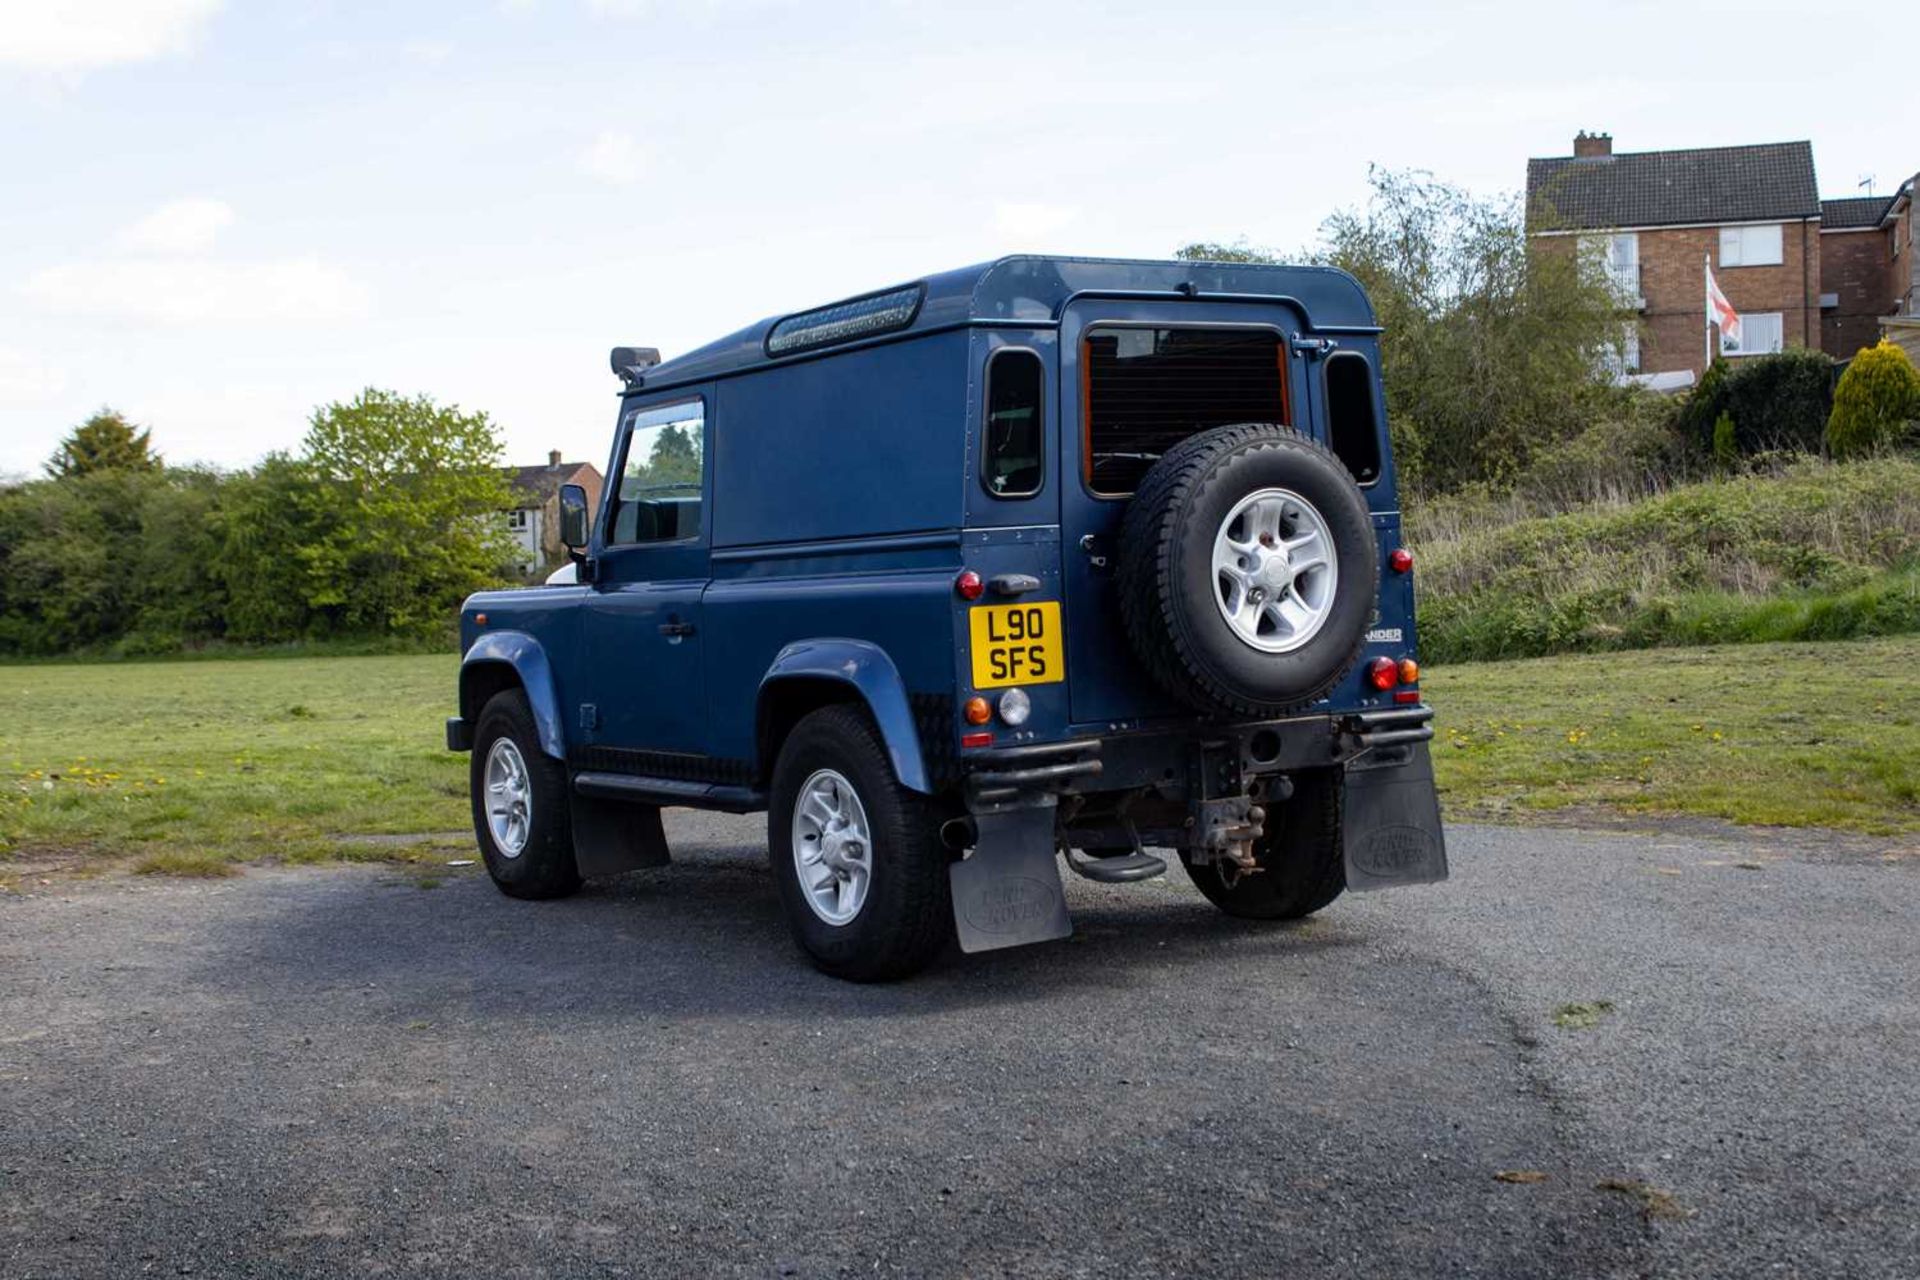 2007 Land Rover Defender 90 County  Powered by the 2.4-litre TDCi unit and features numerous tastefu - Image 7 of 76